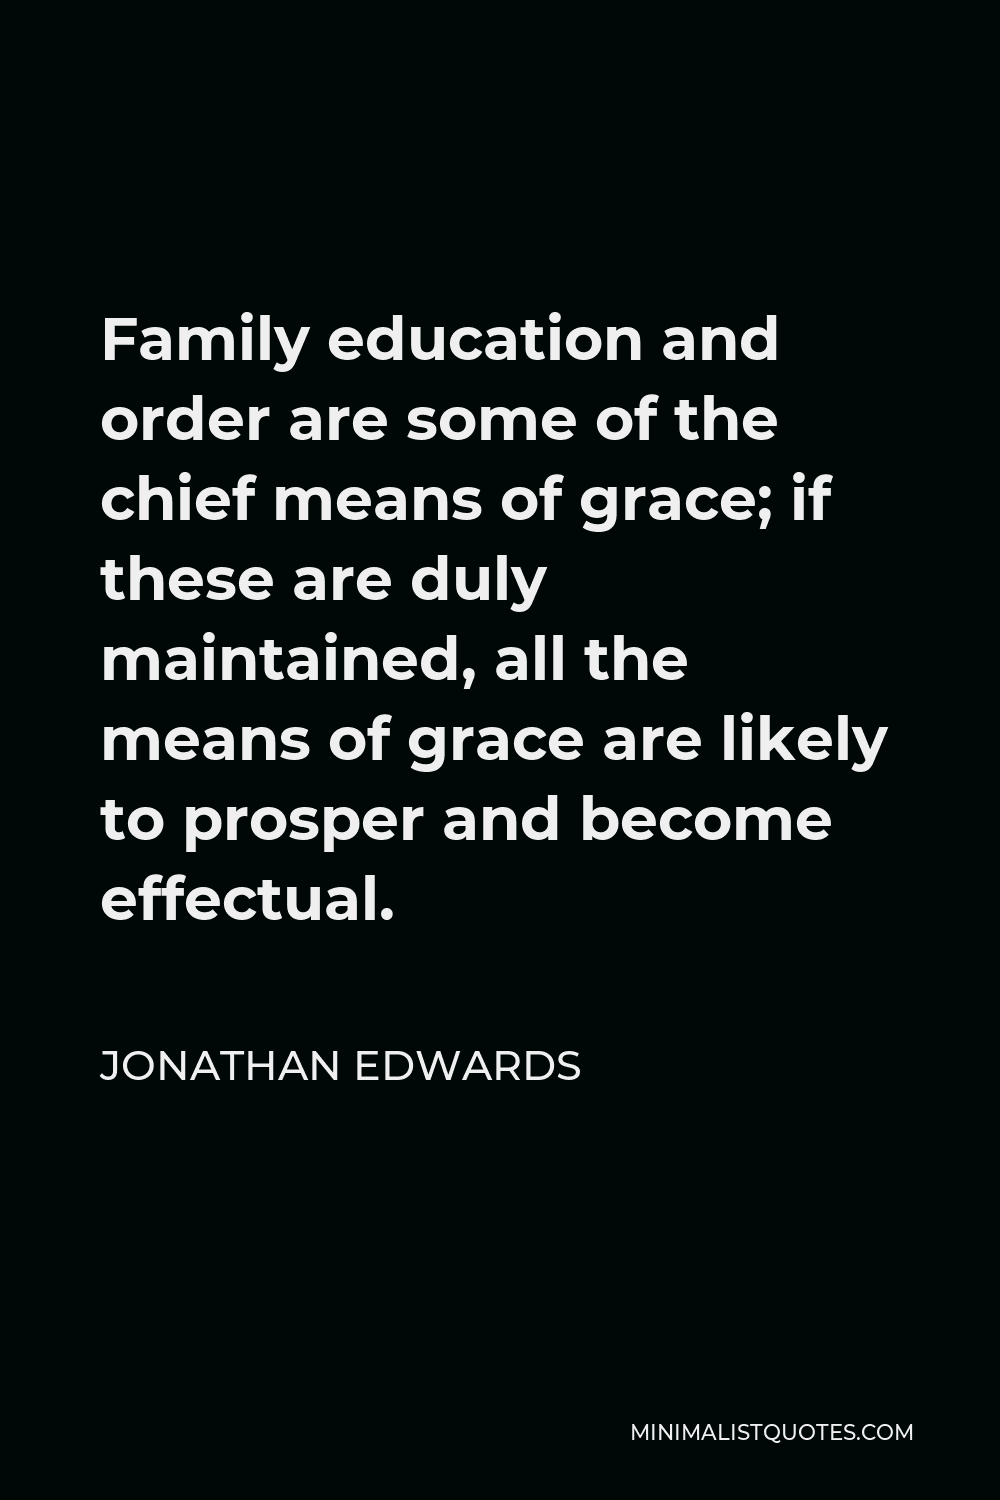 Jonathan Edwards Quote - Family education and order are some of the chief means of grace; if these are duly maintained, all the means of grace are likely to prosper and become effectual.